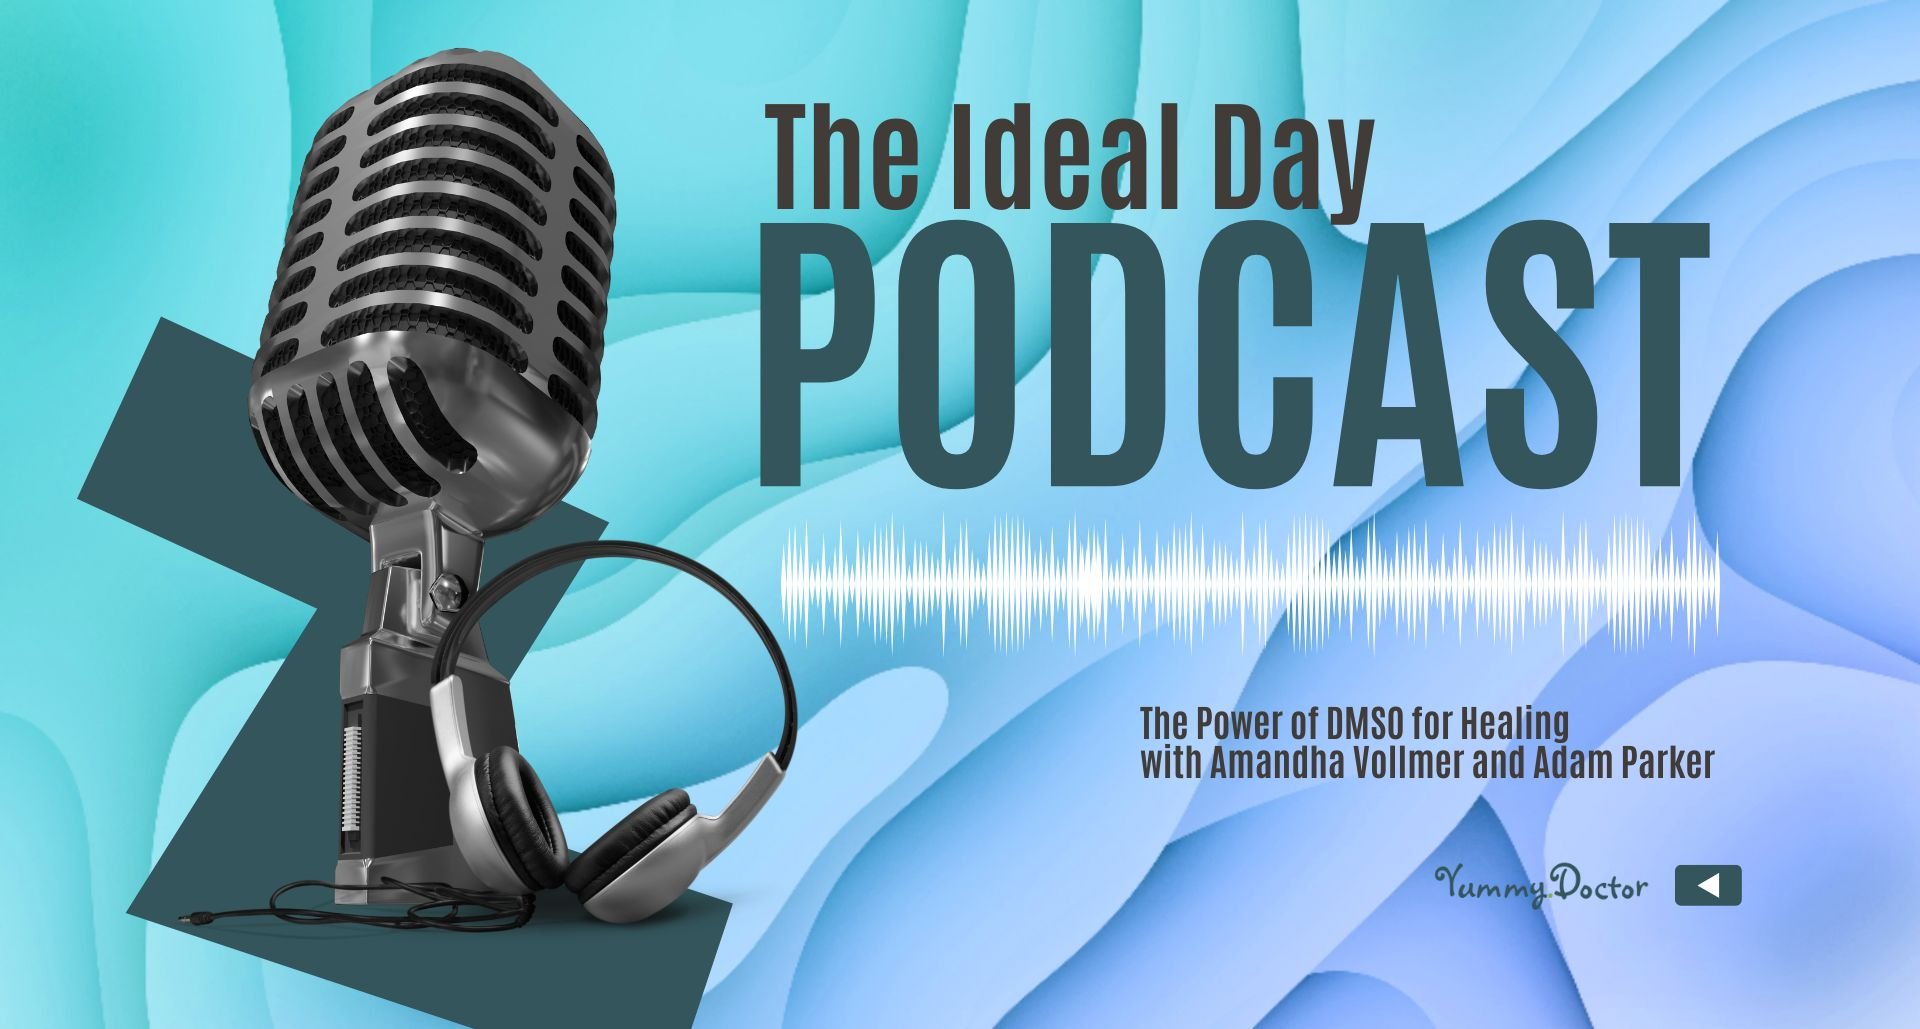 The Power of DMSO for Healing with Amandha Vollmer and Adam Parker of The Ideal Day Podcast